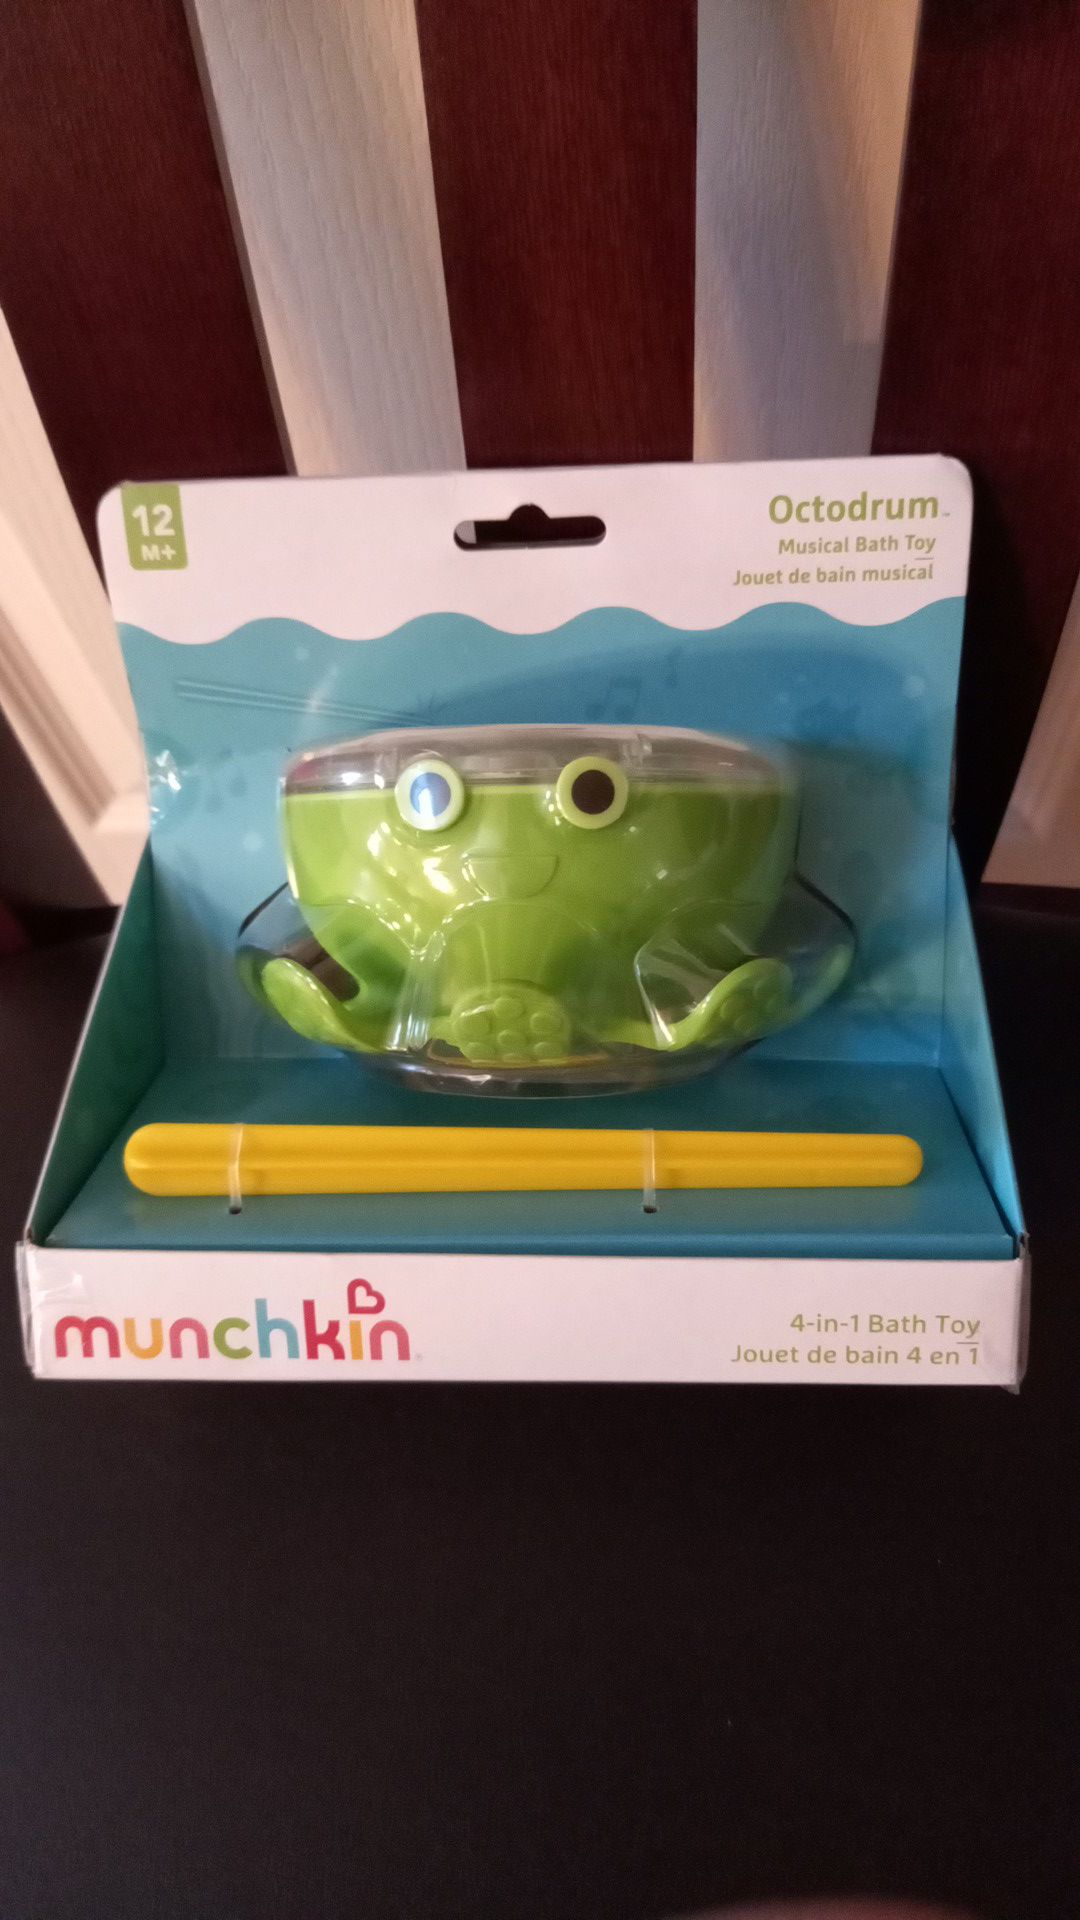 Munchkin Octodrum musical bath toy for ages 12 month+